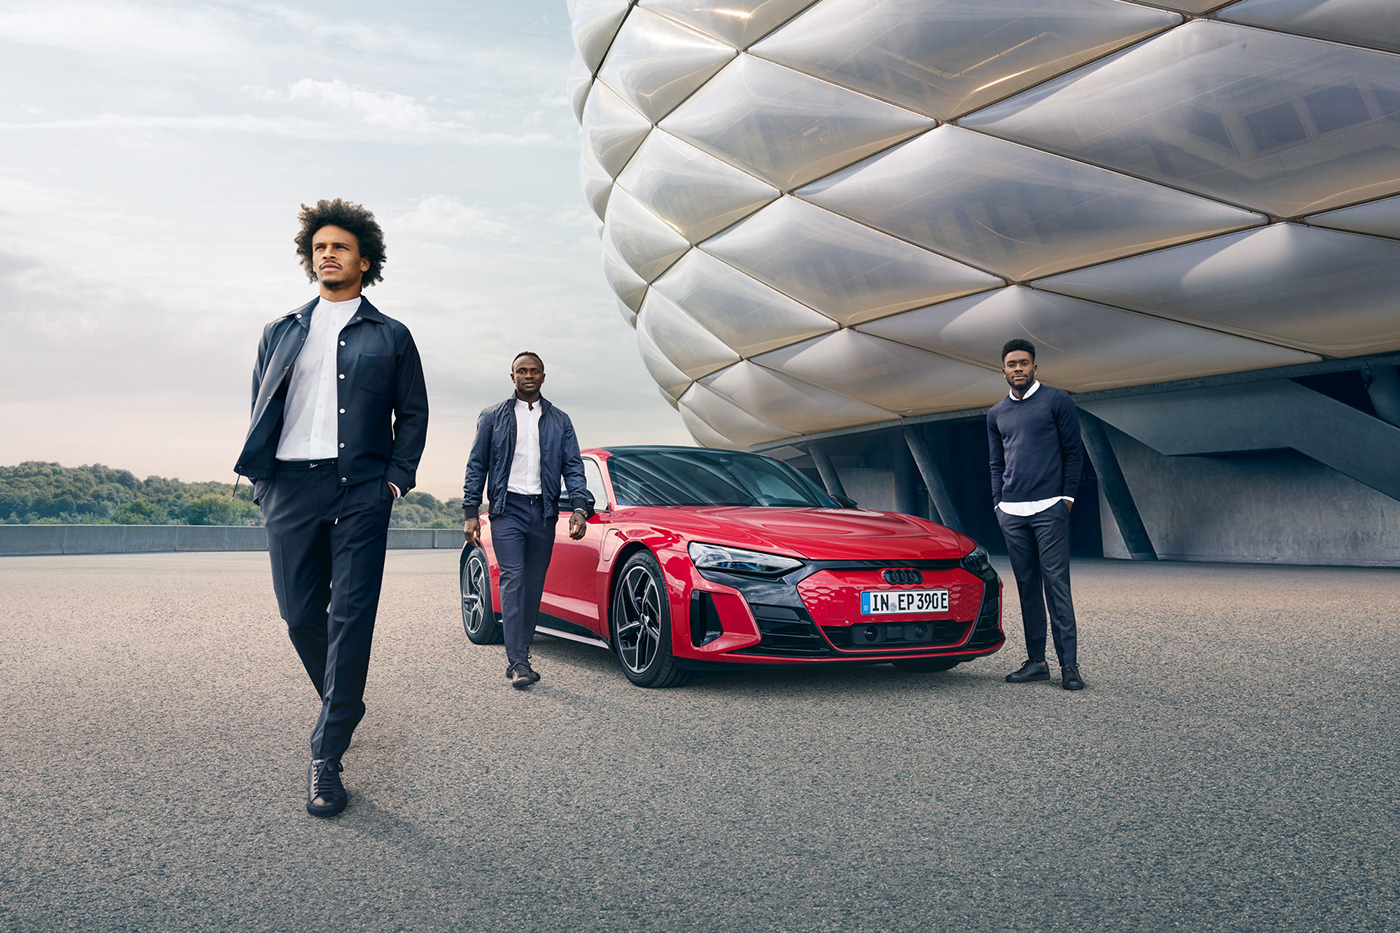 Campaign for the collaboration of Audi and the FC BAYERN MÜNCHEN.​​ The Audi eTron GT and Audi Q4 eT